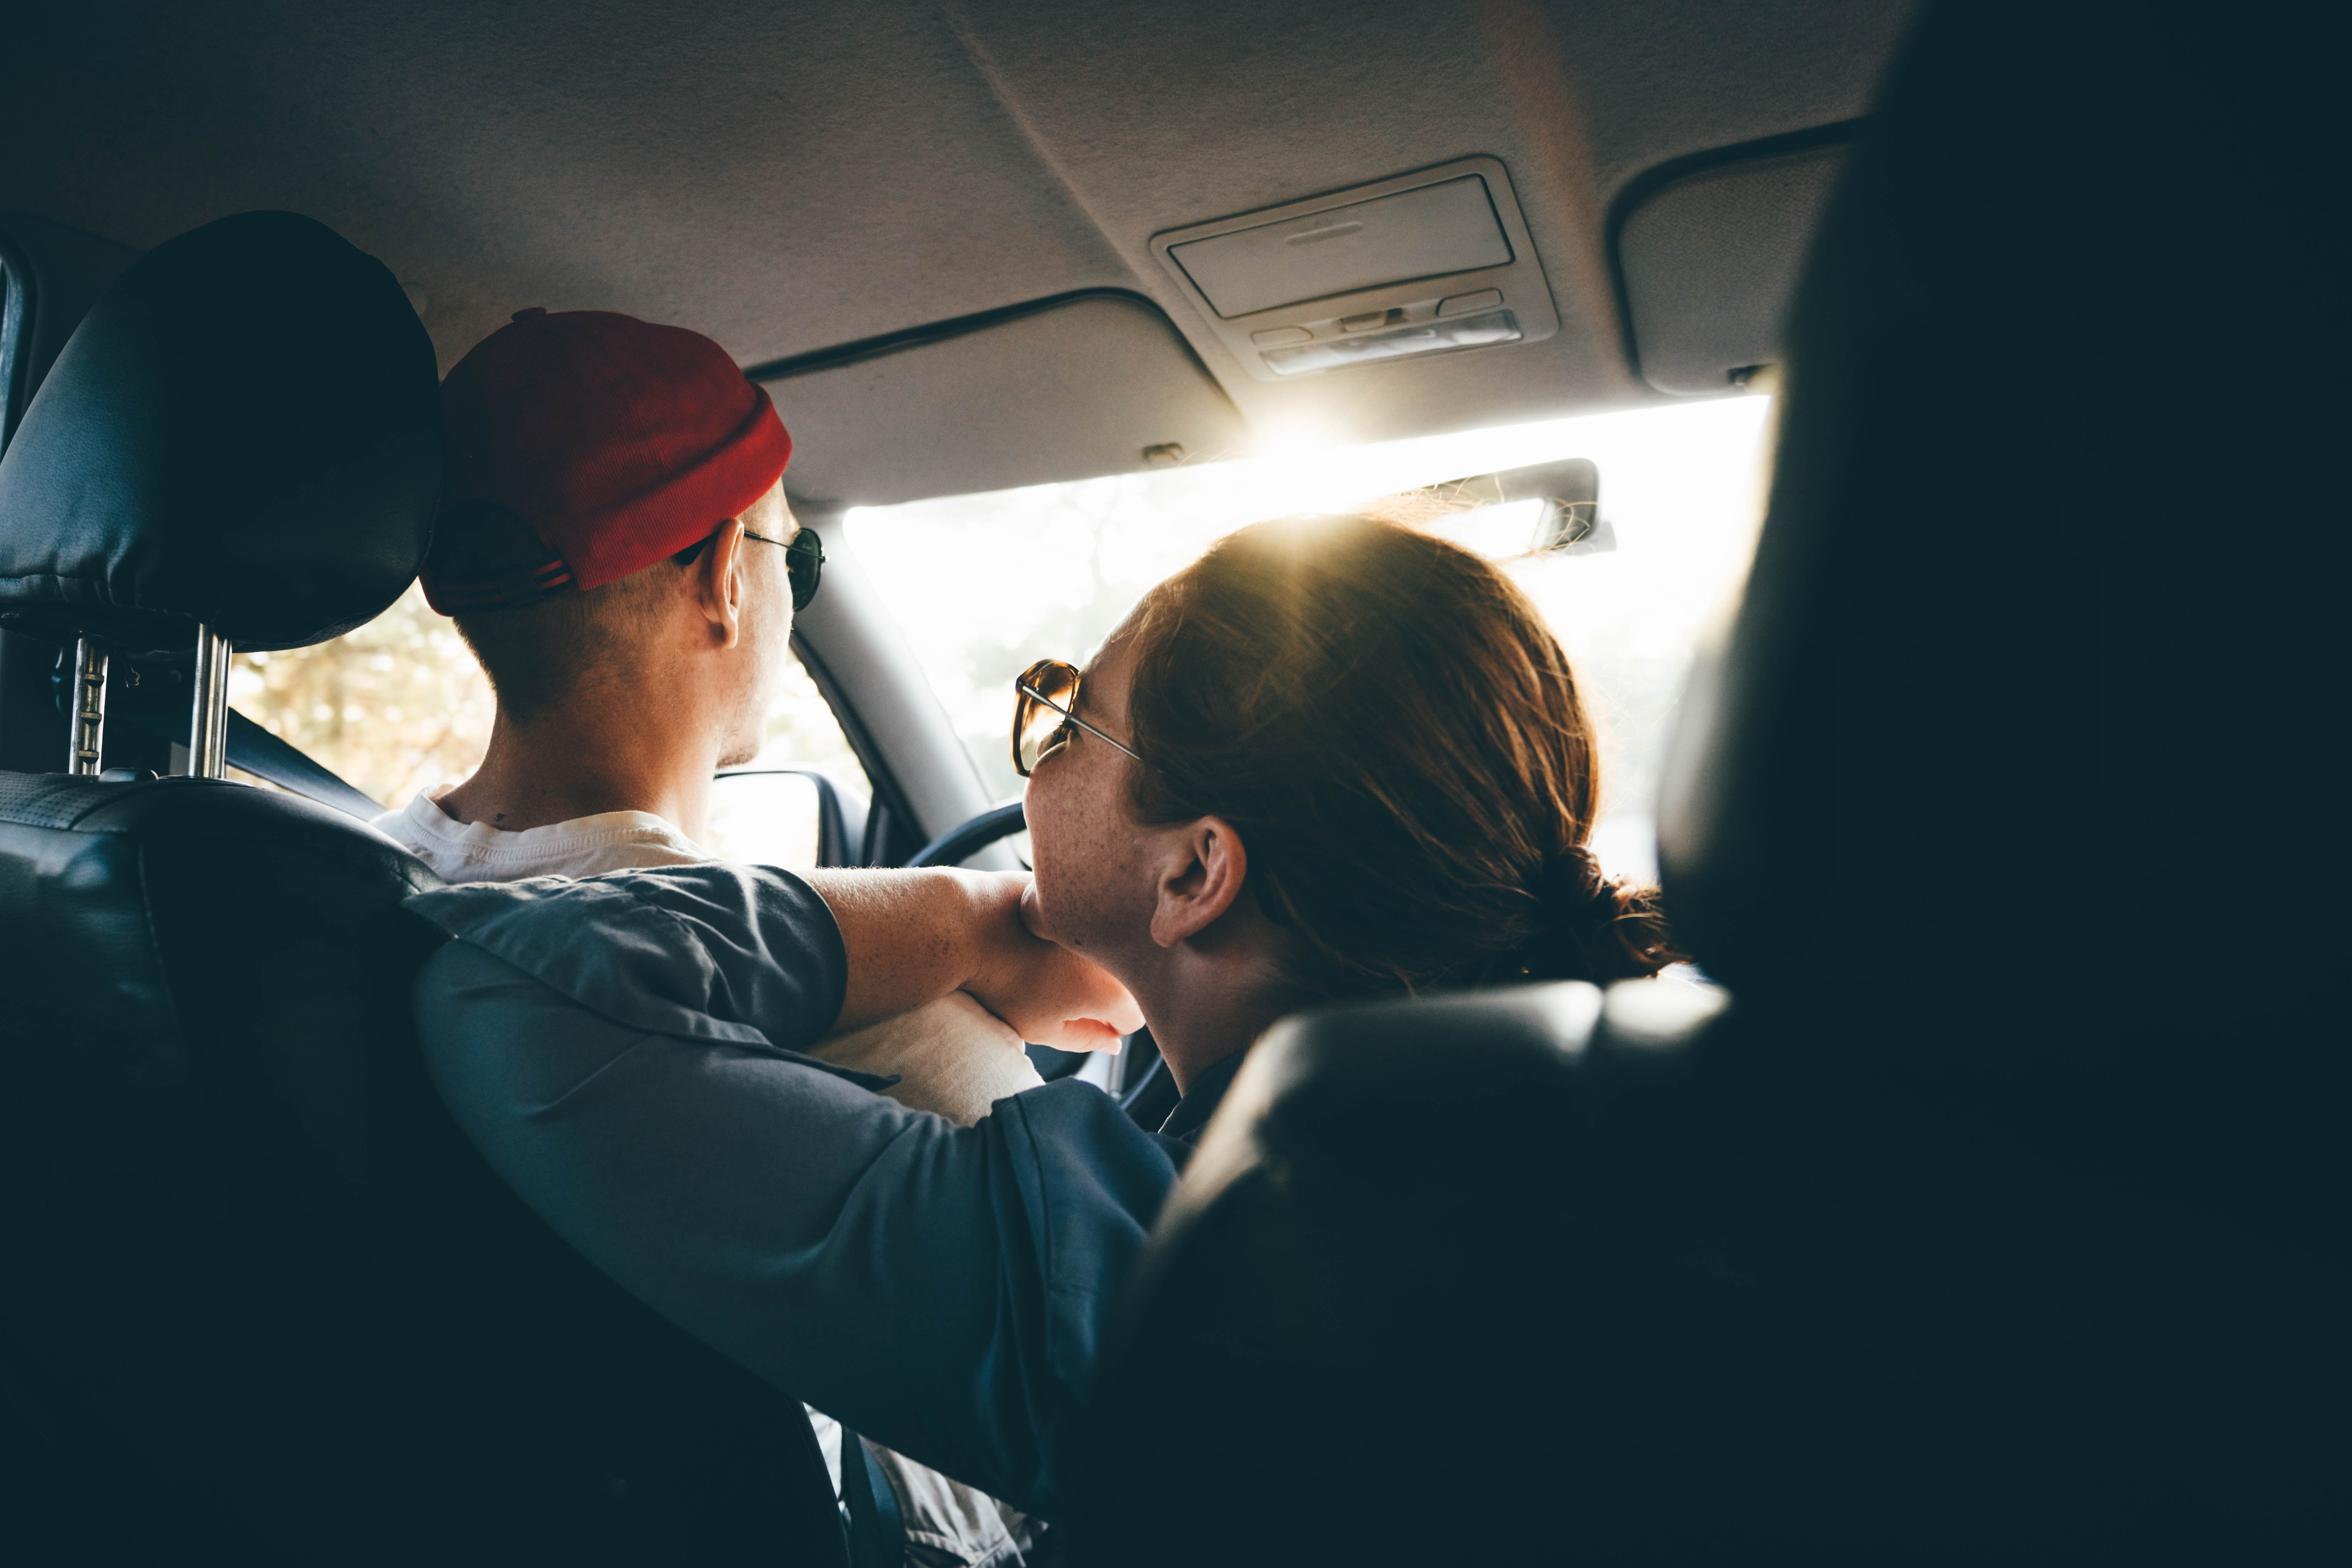 A couple, one wearing glasses and a red cap, the other leaning over the car&#x27;s console, share a close moment inside a car